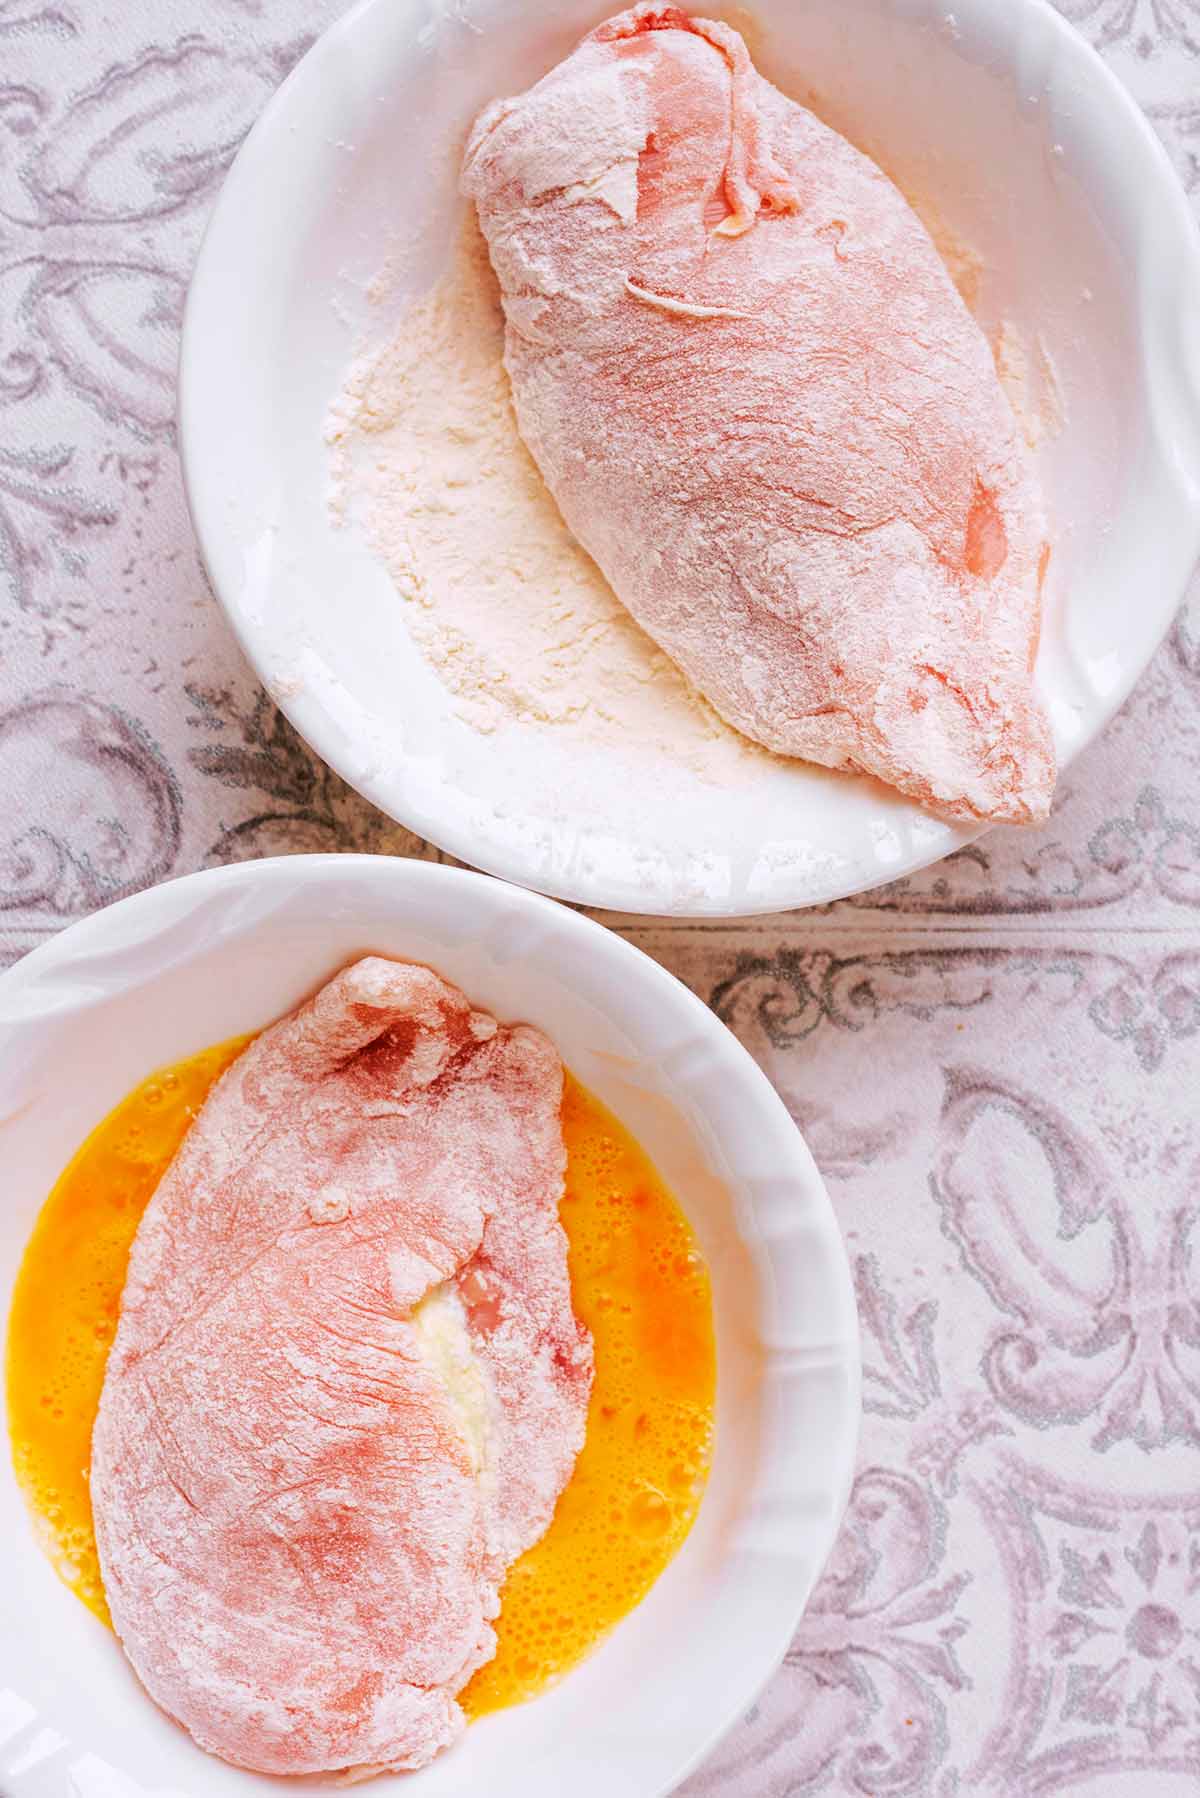 Two chicken breasts, both coated in flour, one in a bowl of beaten egg.